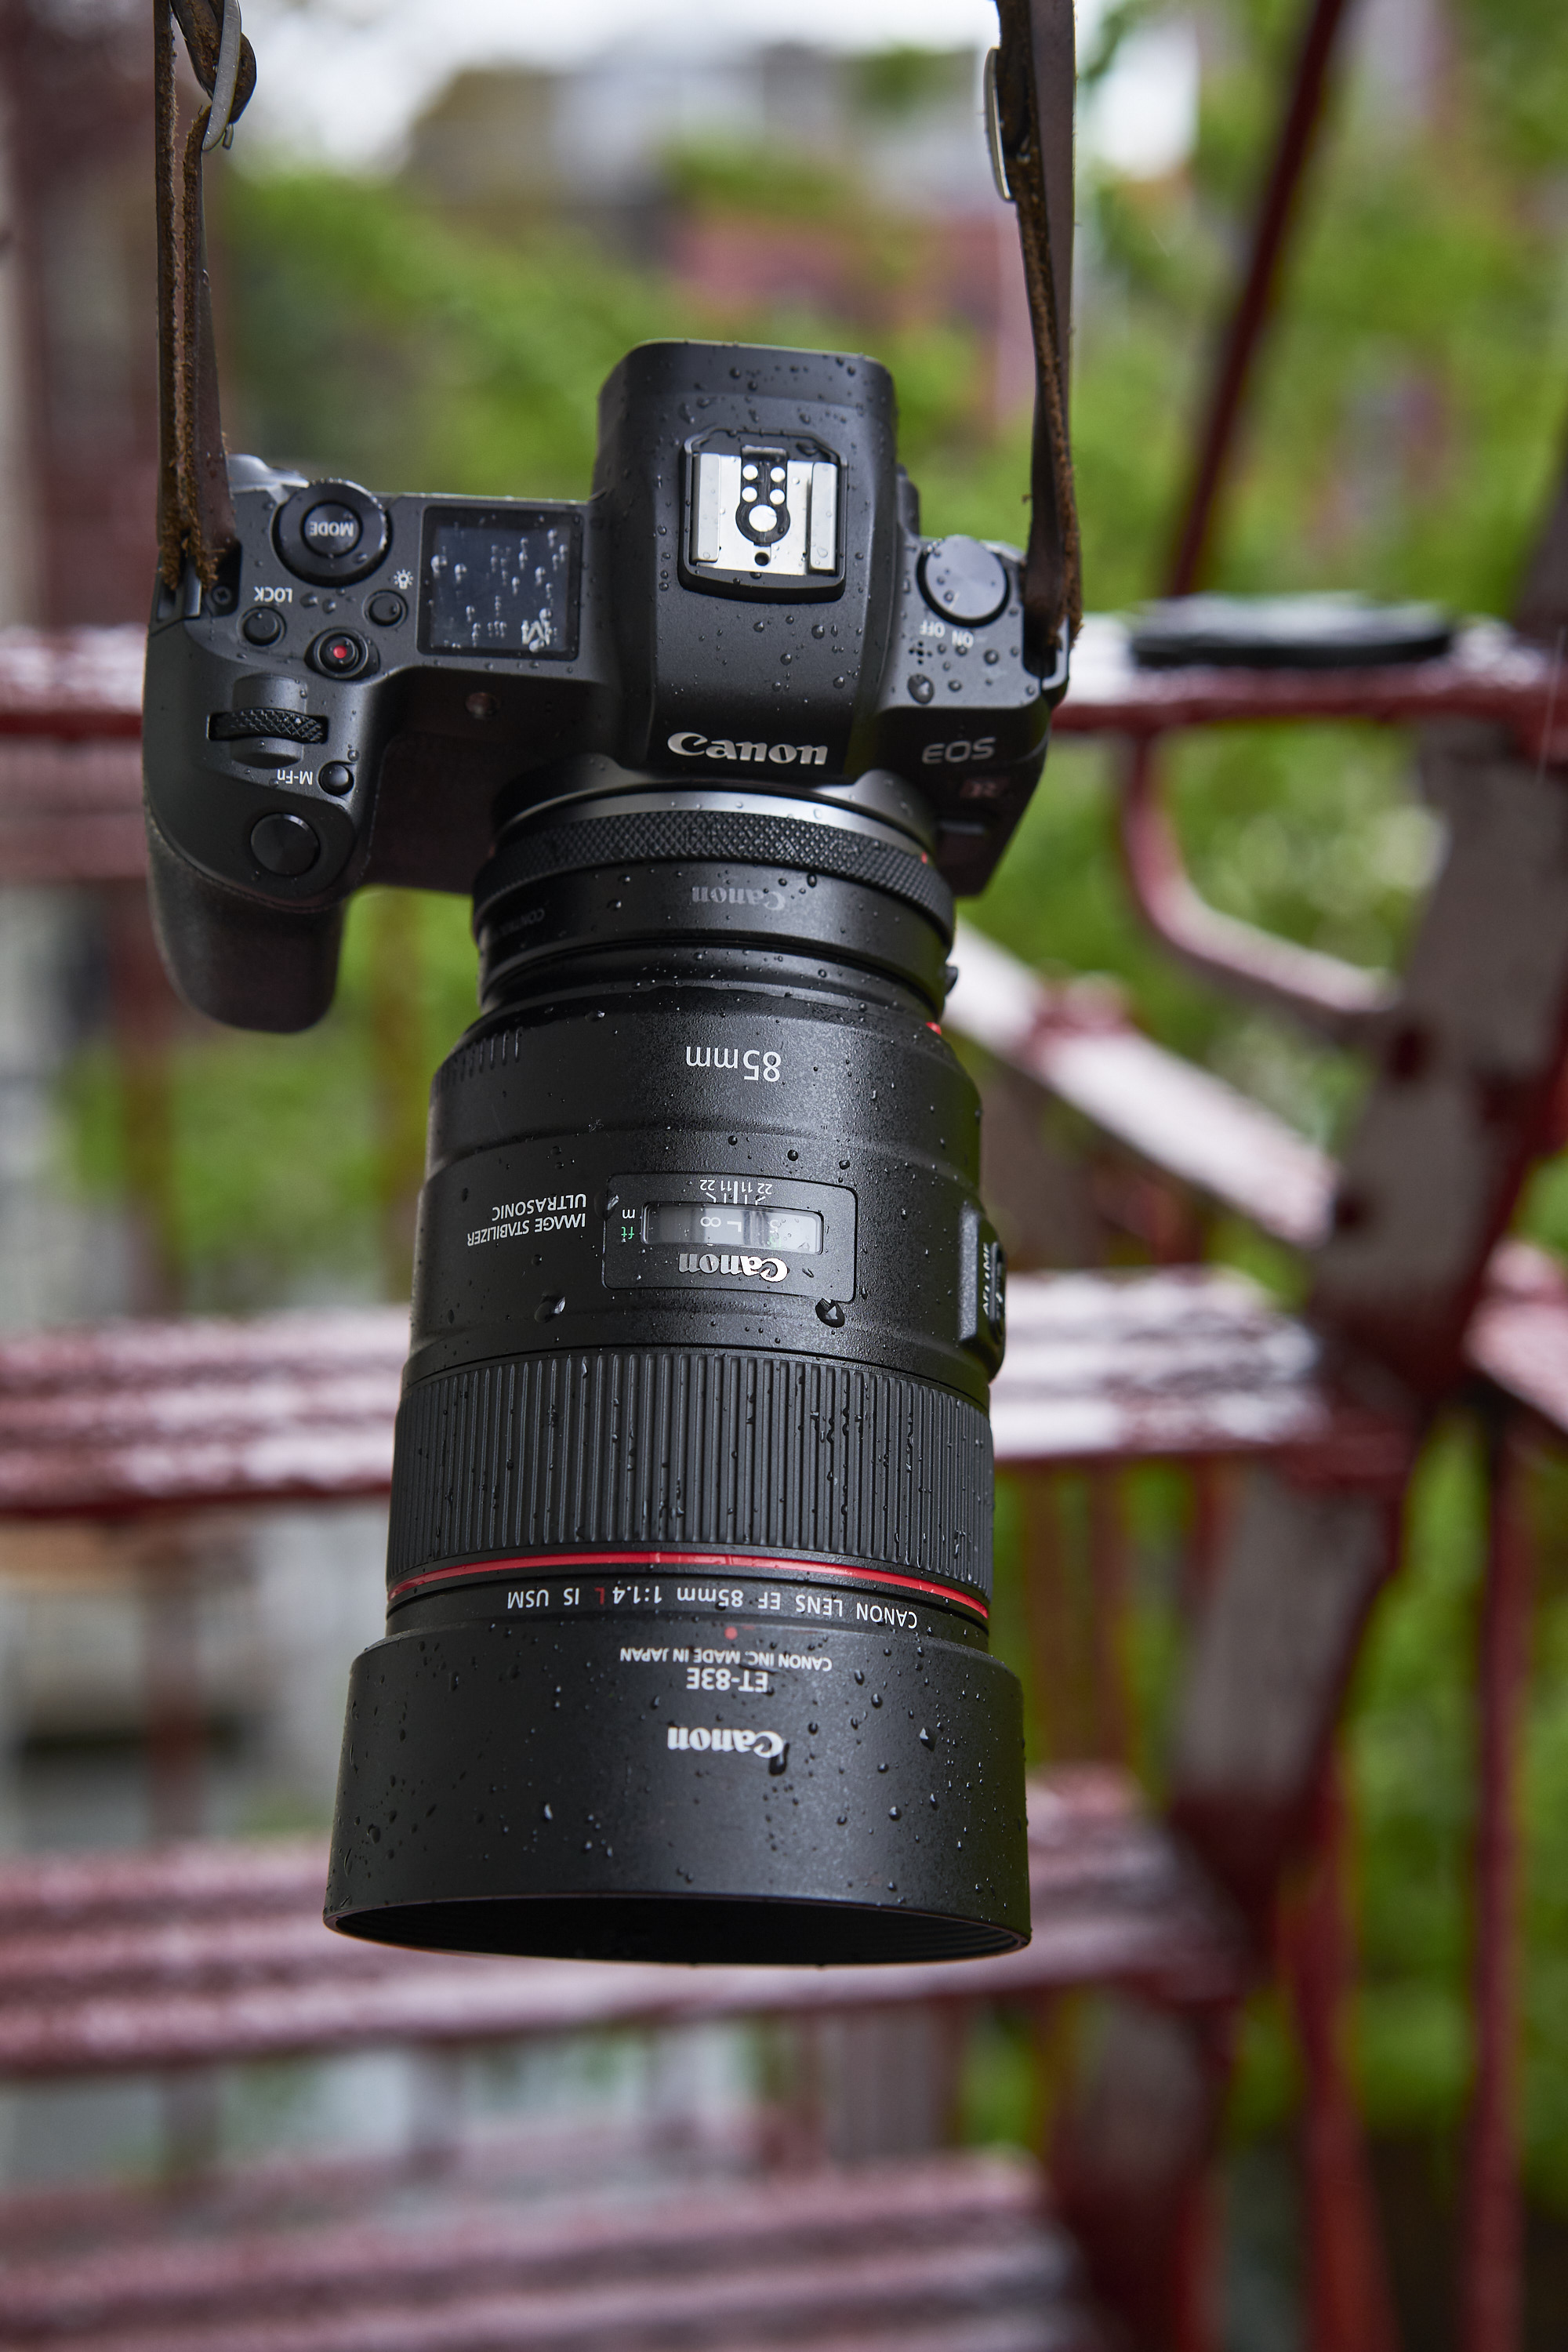 Review: Canon 85mm f1.4 L IS USM (Works Well with Eye Autofocus)